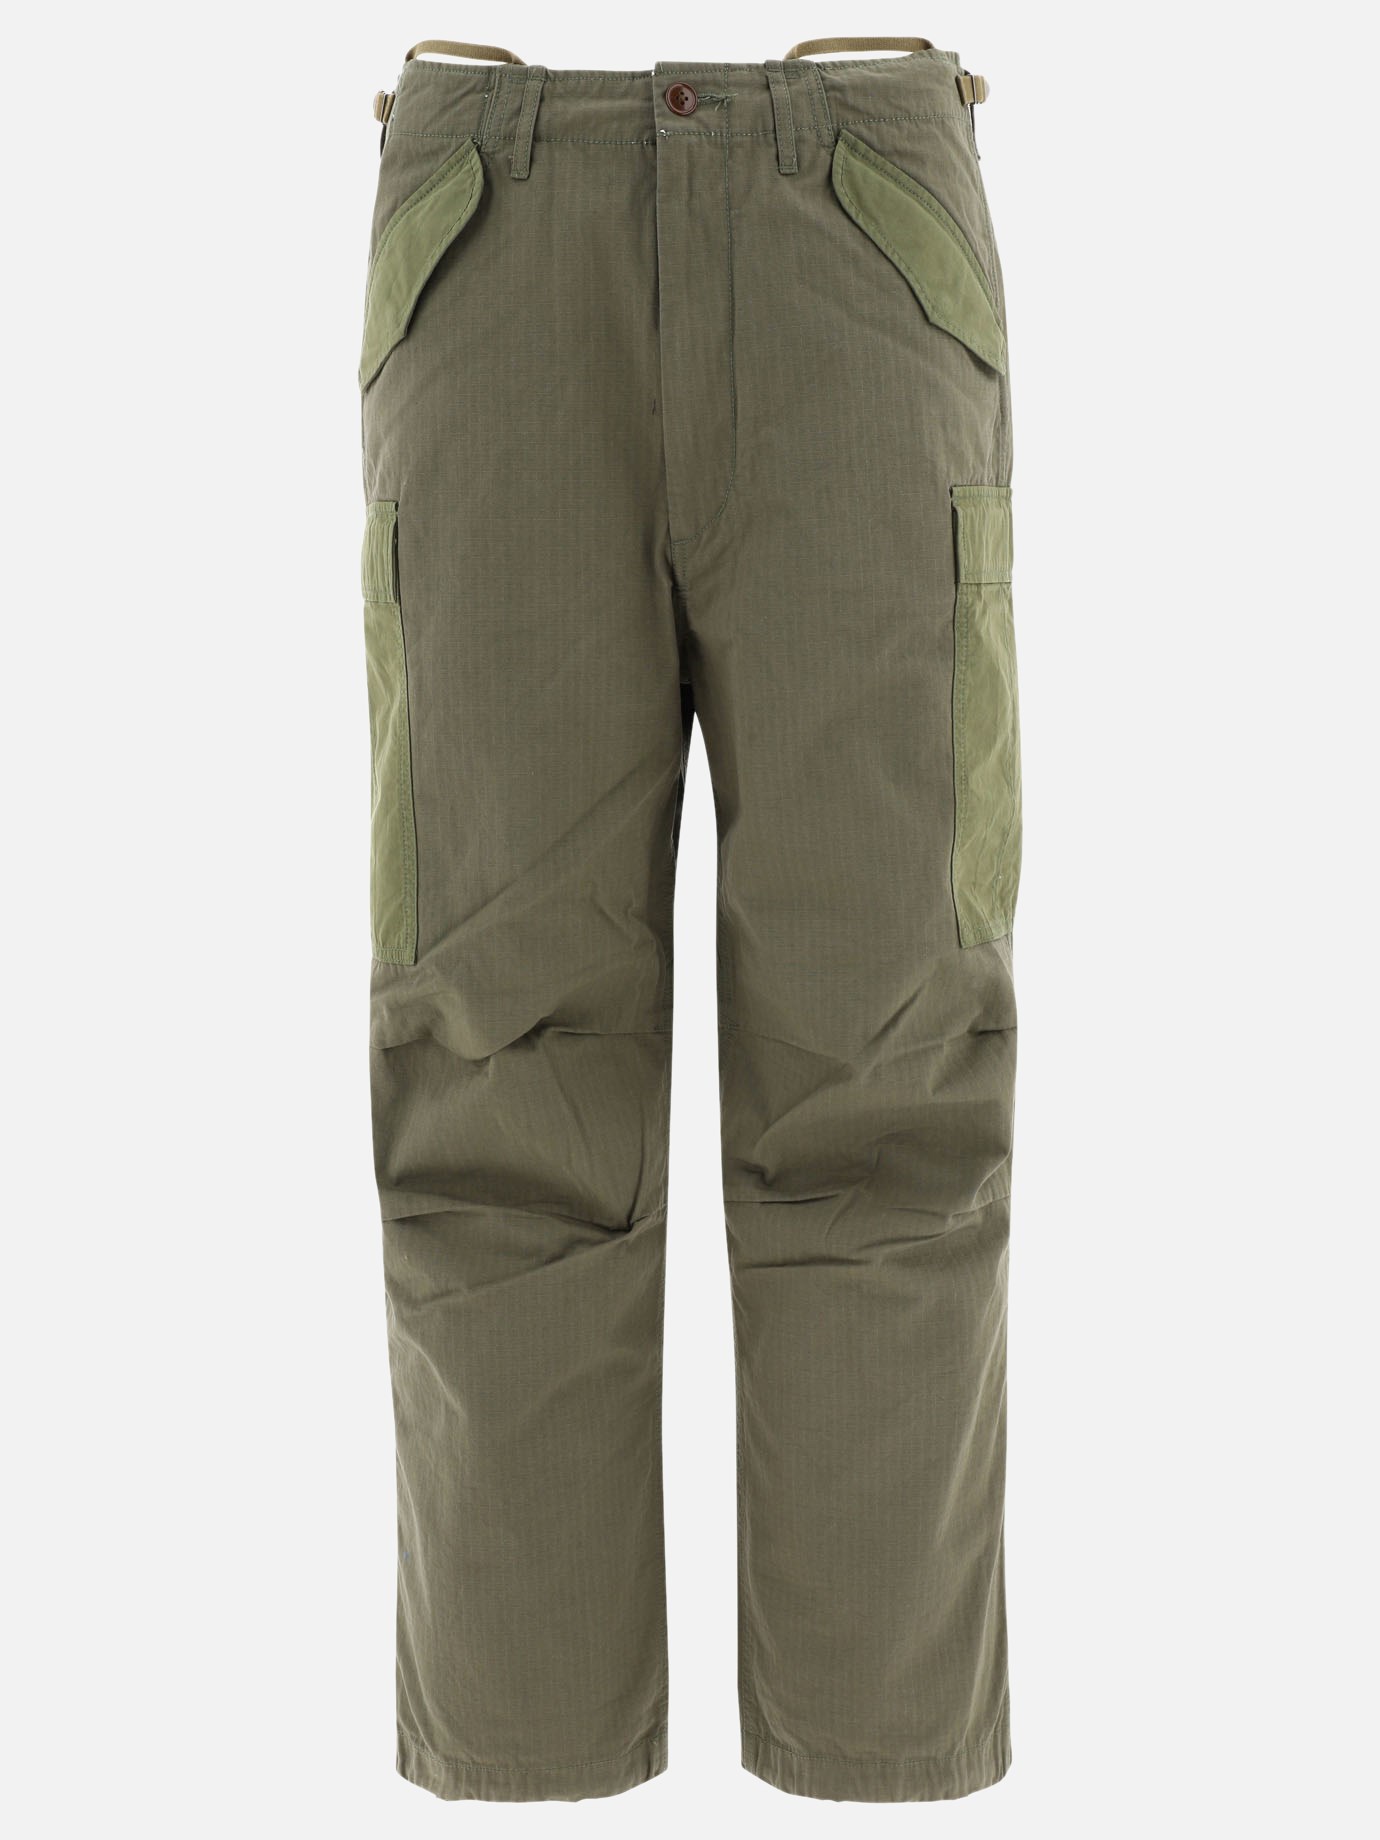 Cargo trousers with drawstringby Nanamica - 4